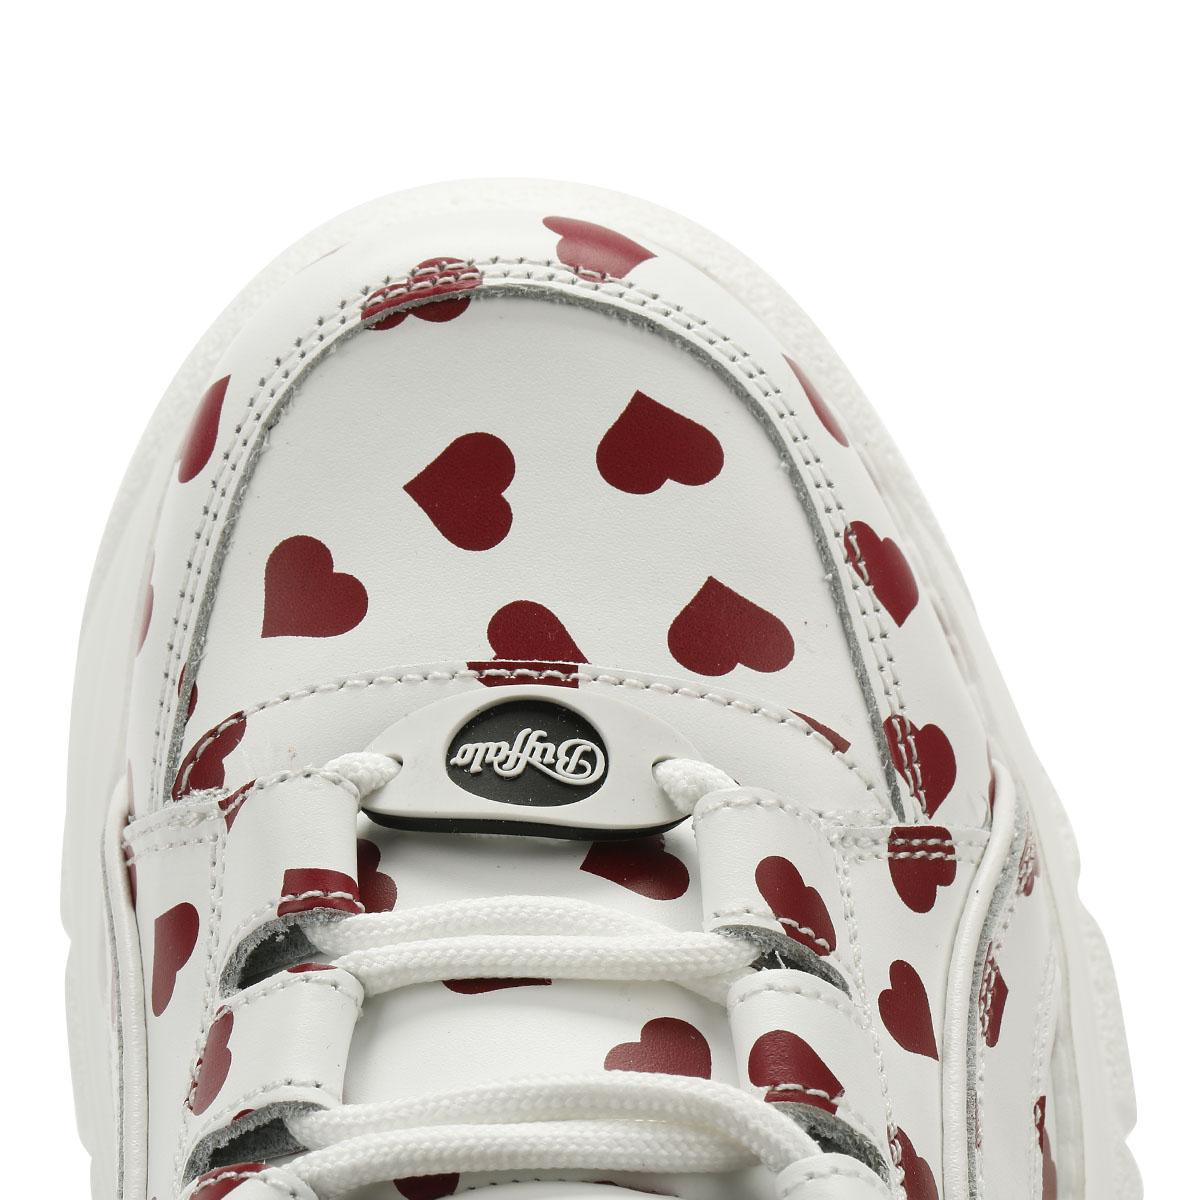 Buffalo White And Red Heart Print Cyber Platform Leather Sneakers - Lyst